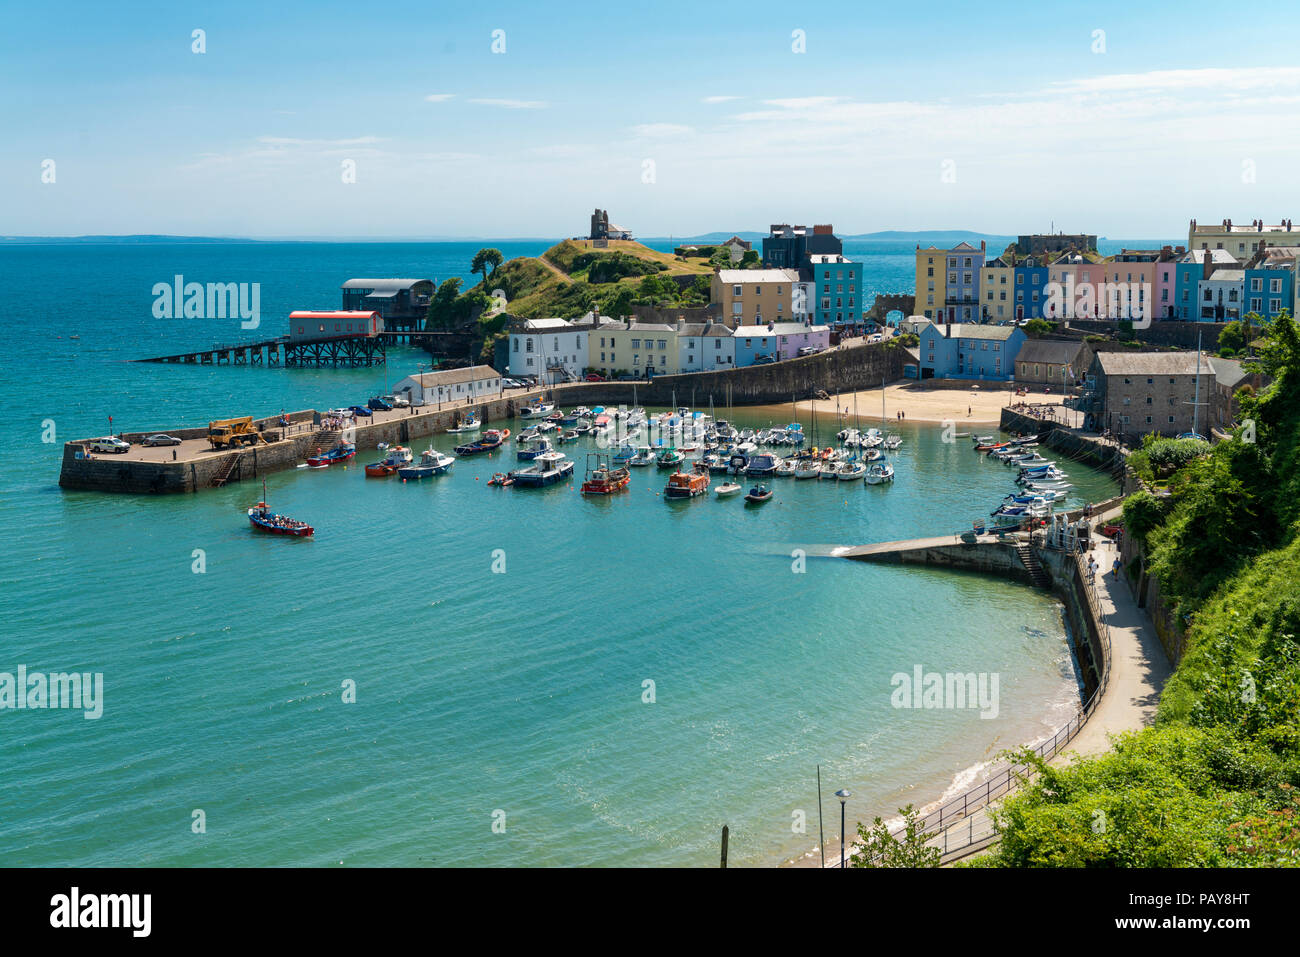 The pretty seaside town of Tenby, Pembrokeshire, Wales, UK looks stunning under a blue summer sky. Colourful  houses surround the harbour at high tide. Stock Photo